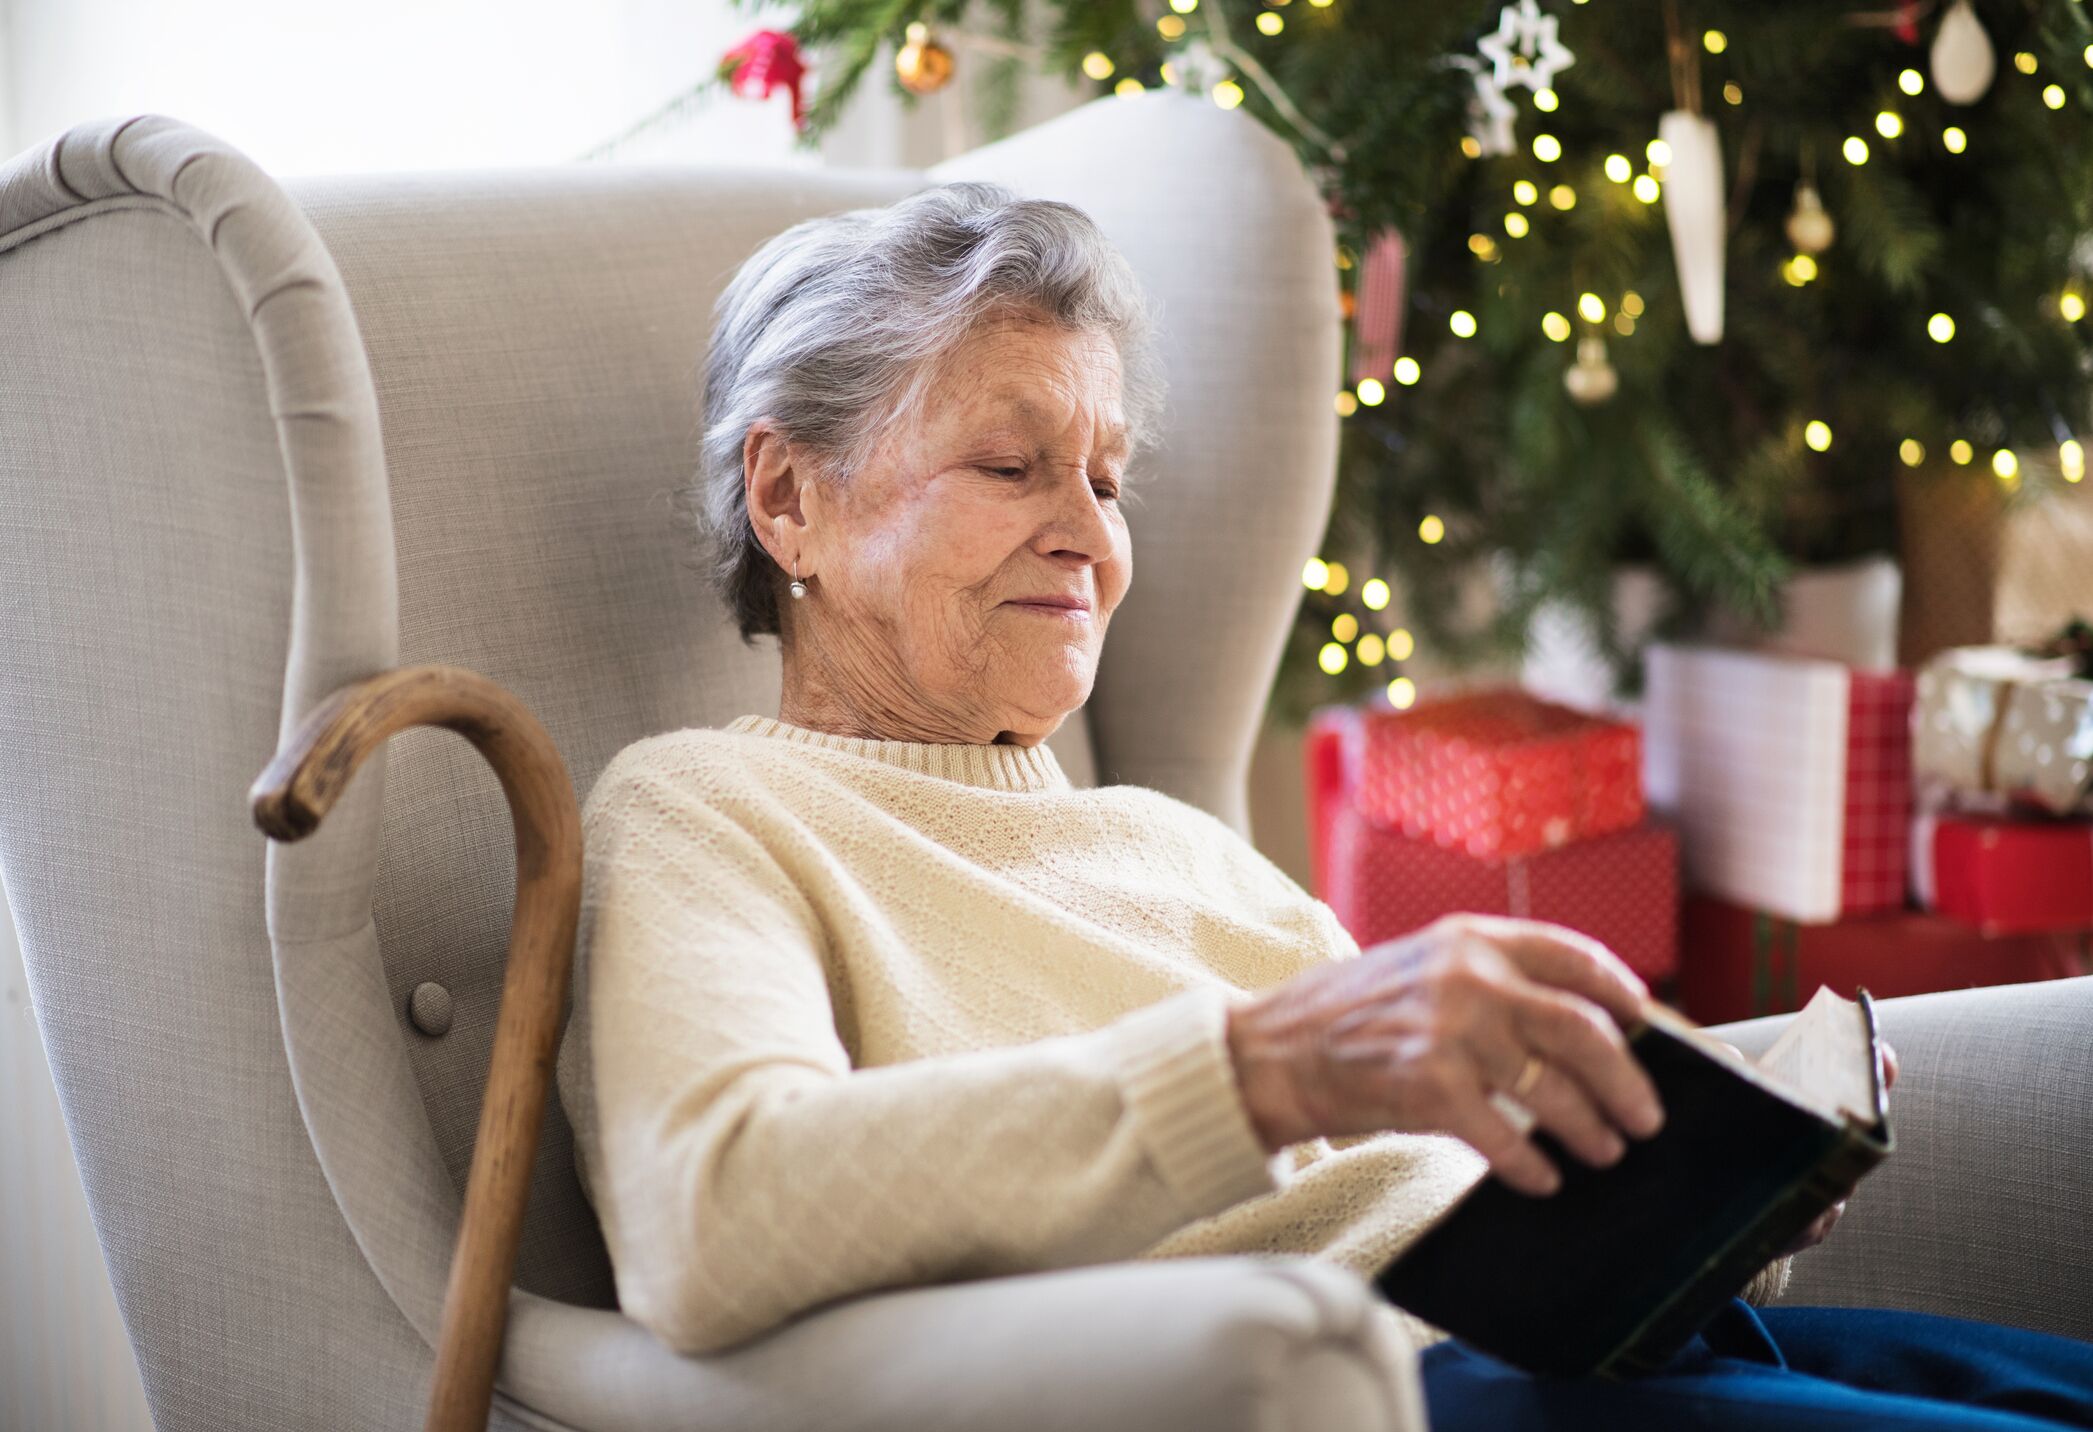 Senior woman sitting on couch with cane reading book